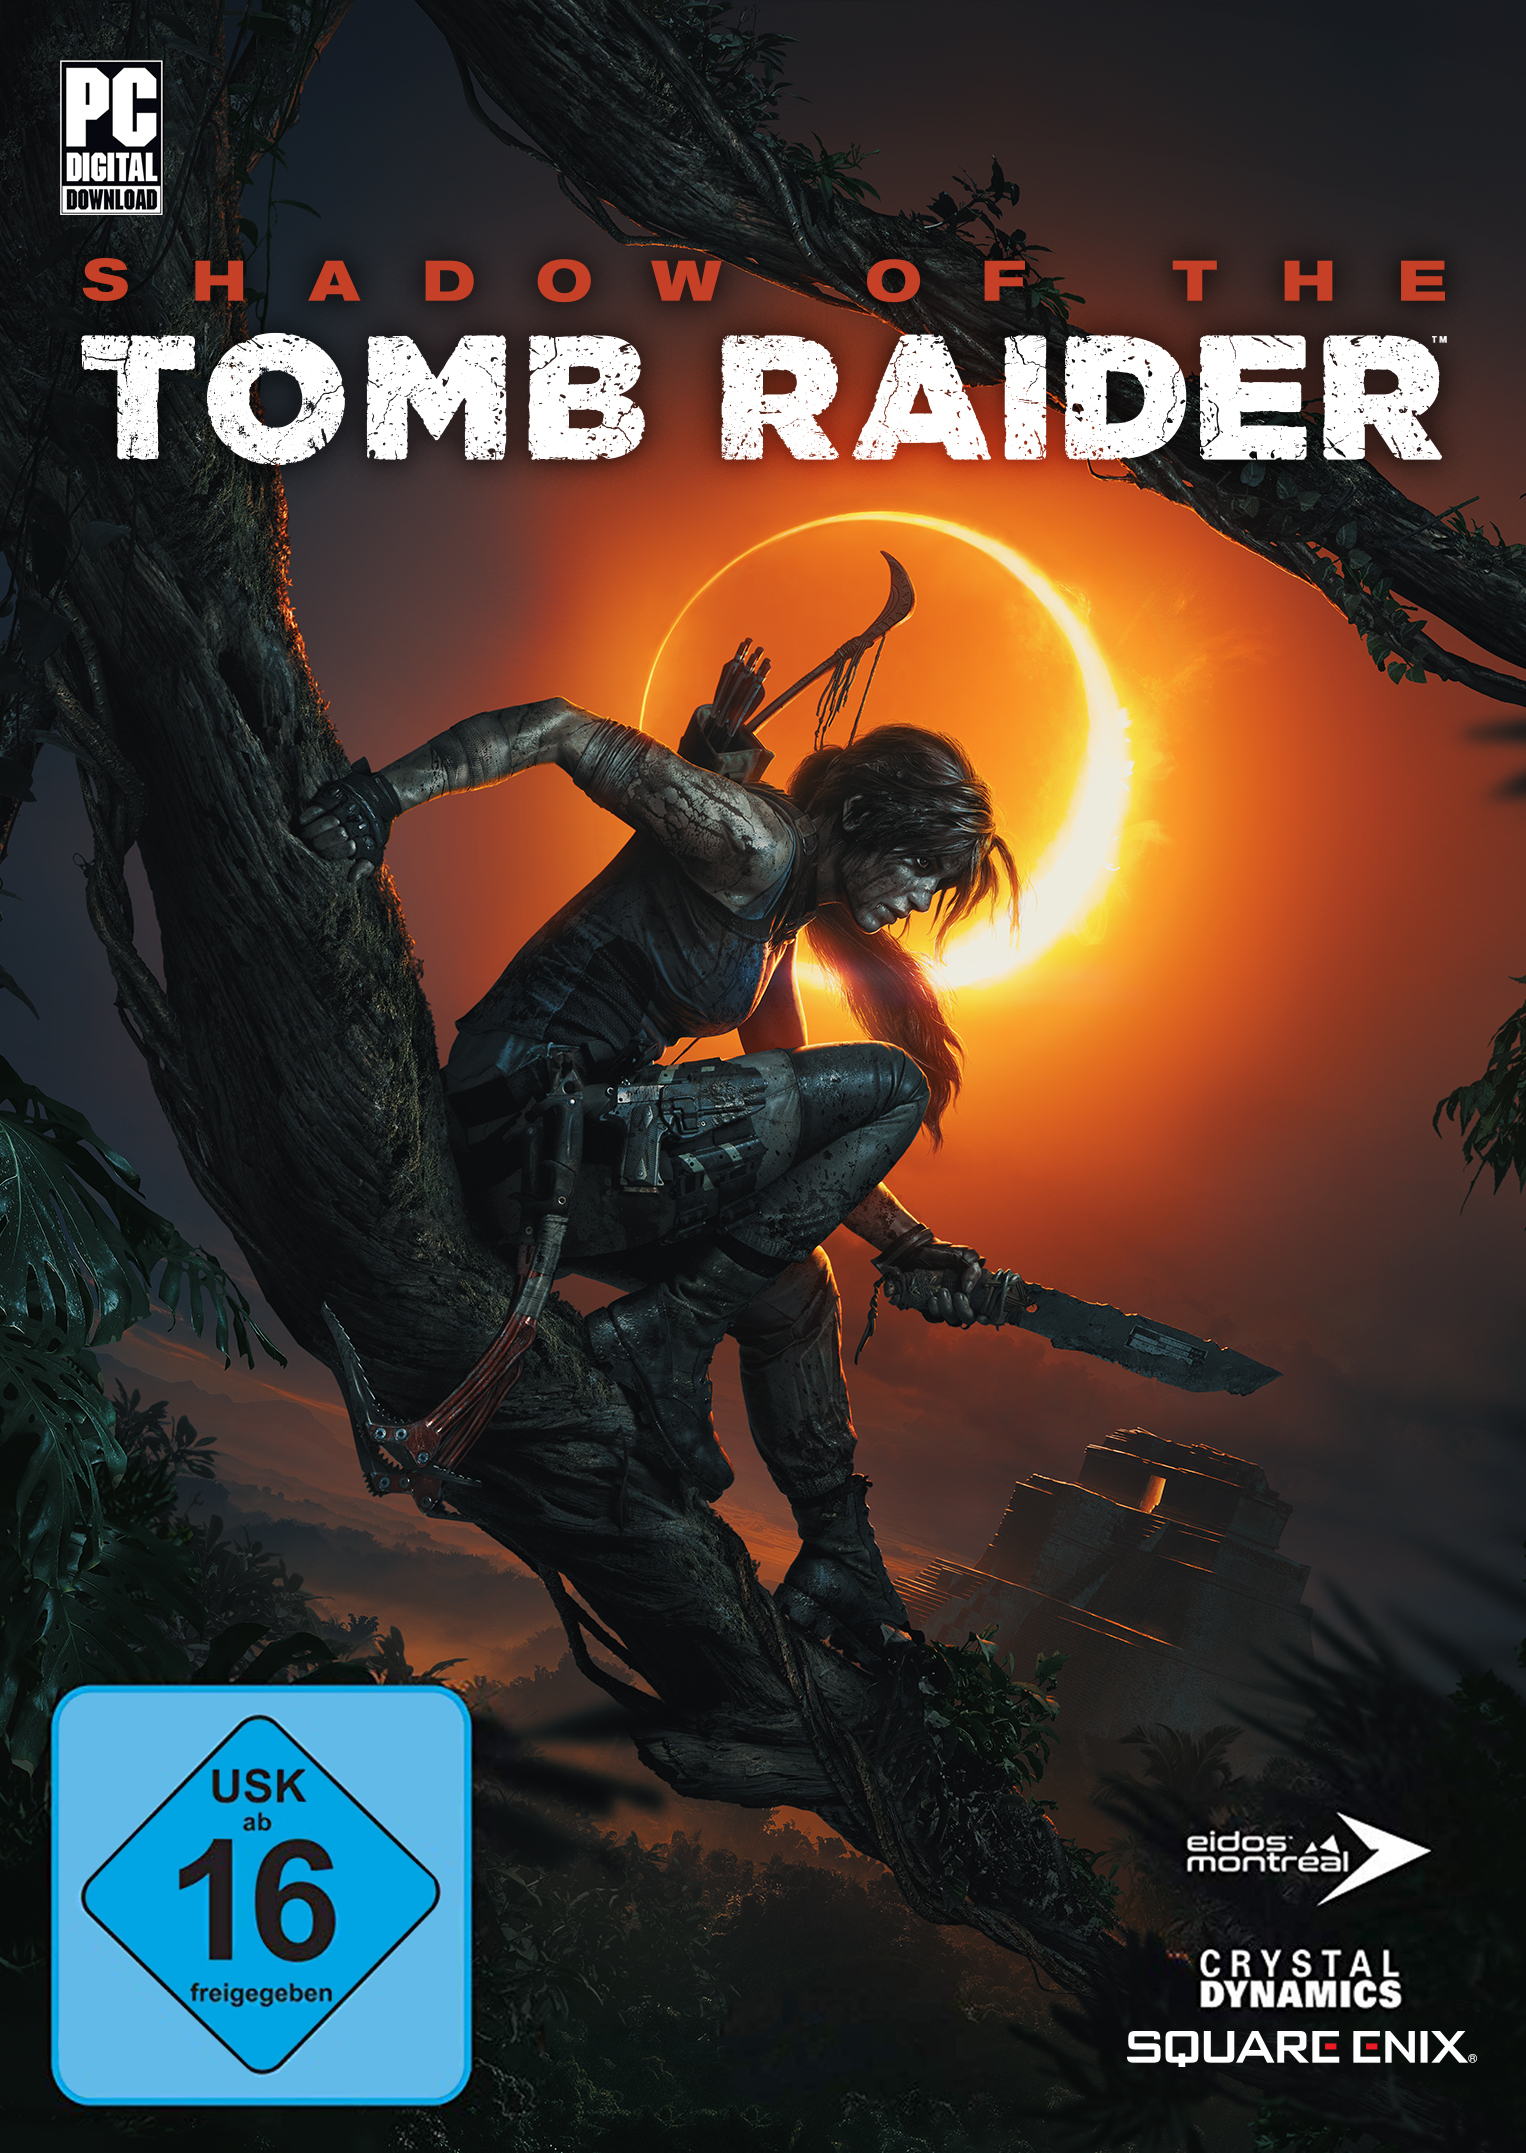 Shadow of the Tomb [Game Raider - Boy